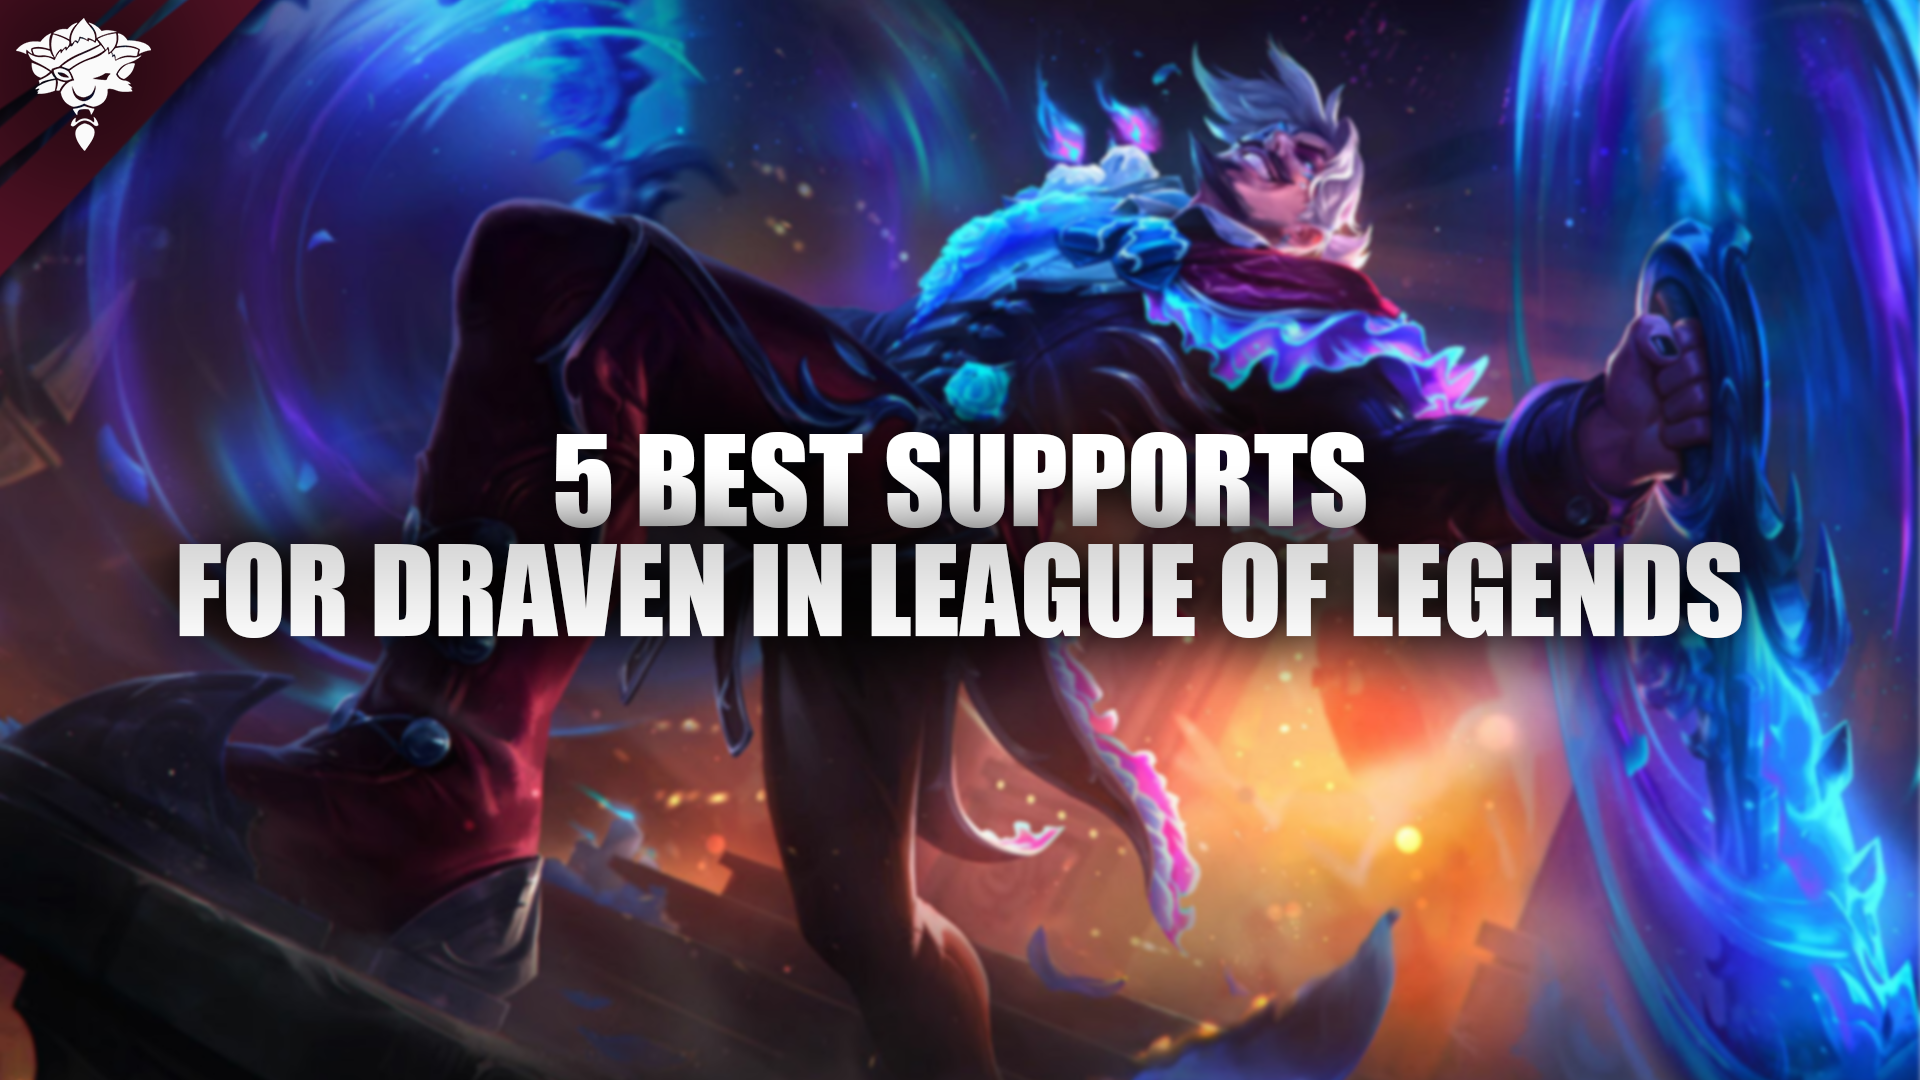 5 Best Supports for Draven in League of Legends